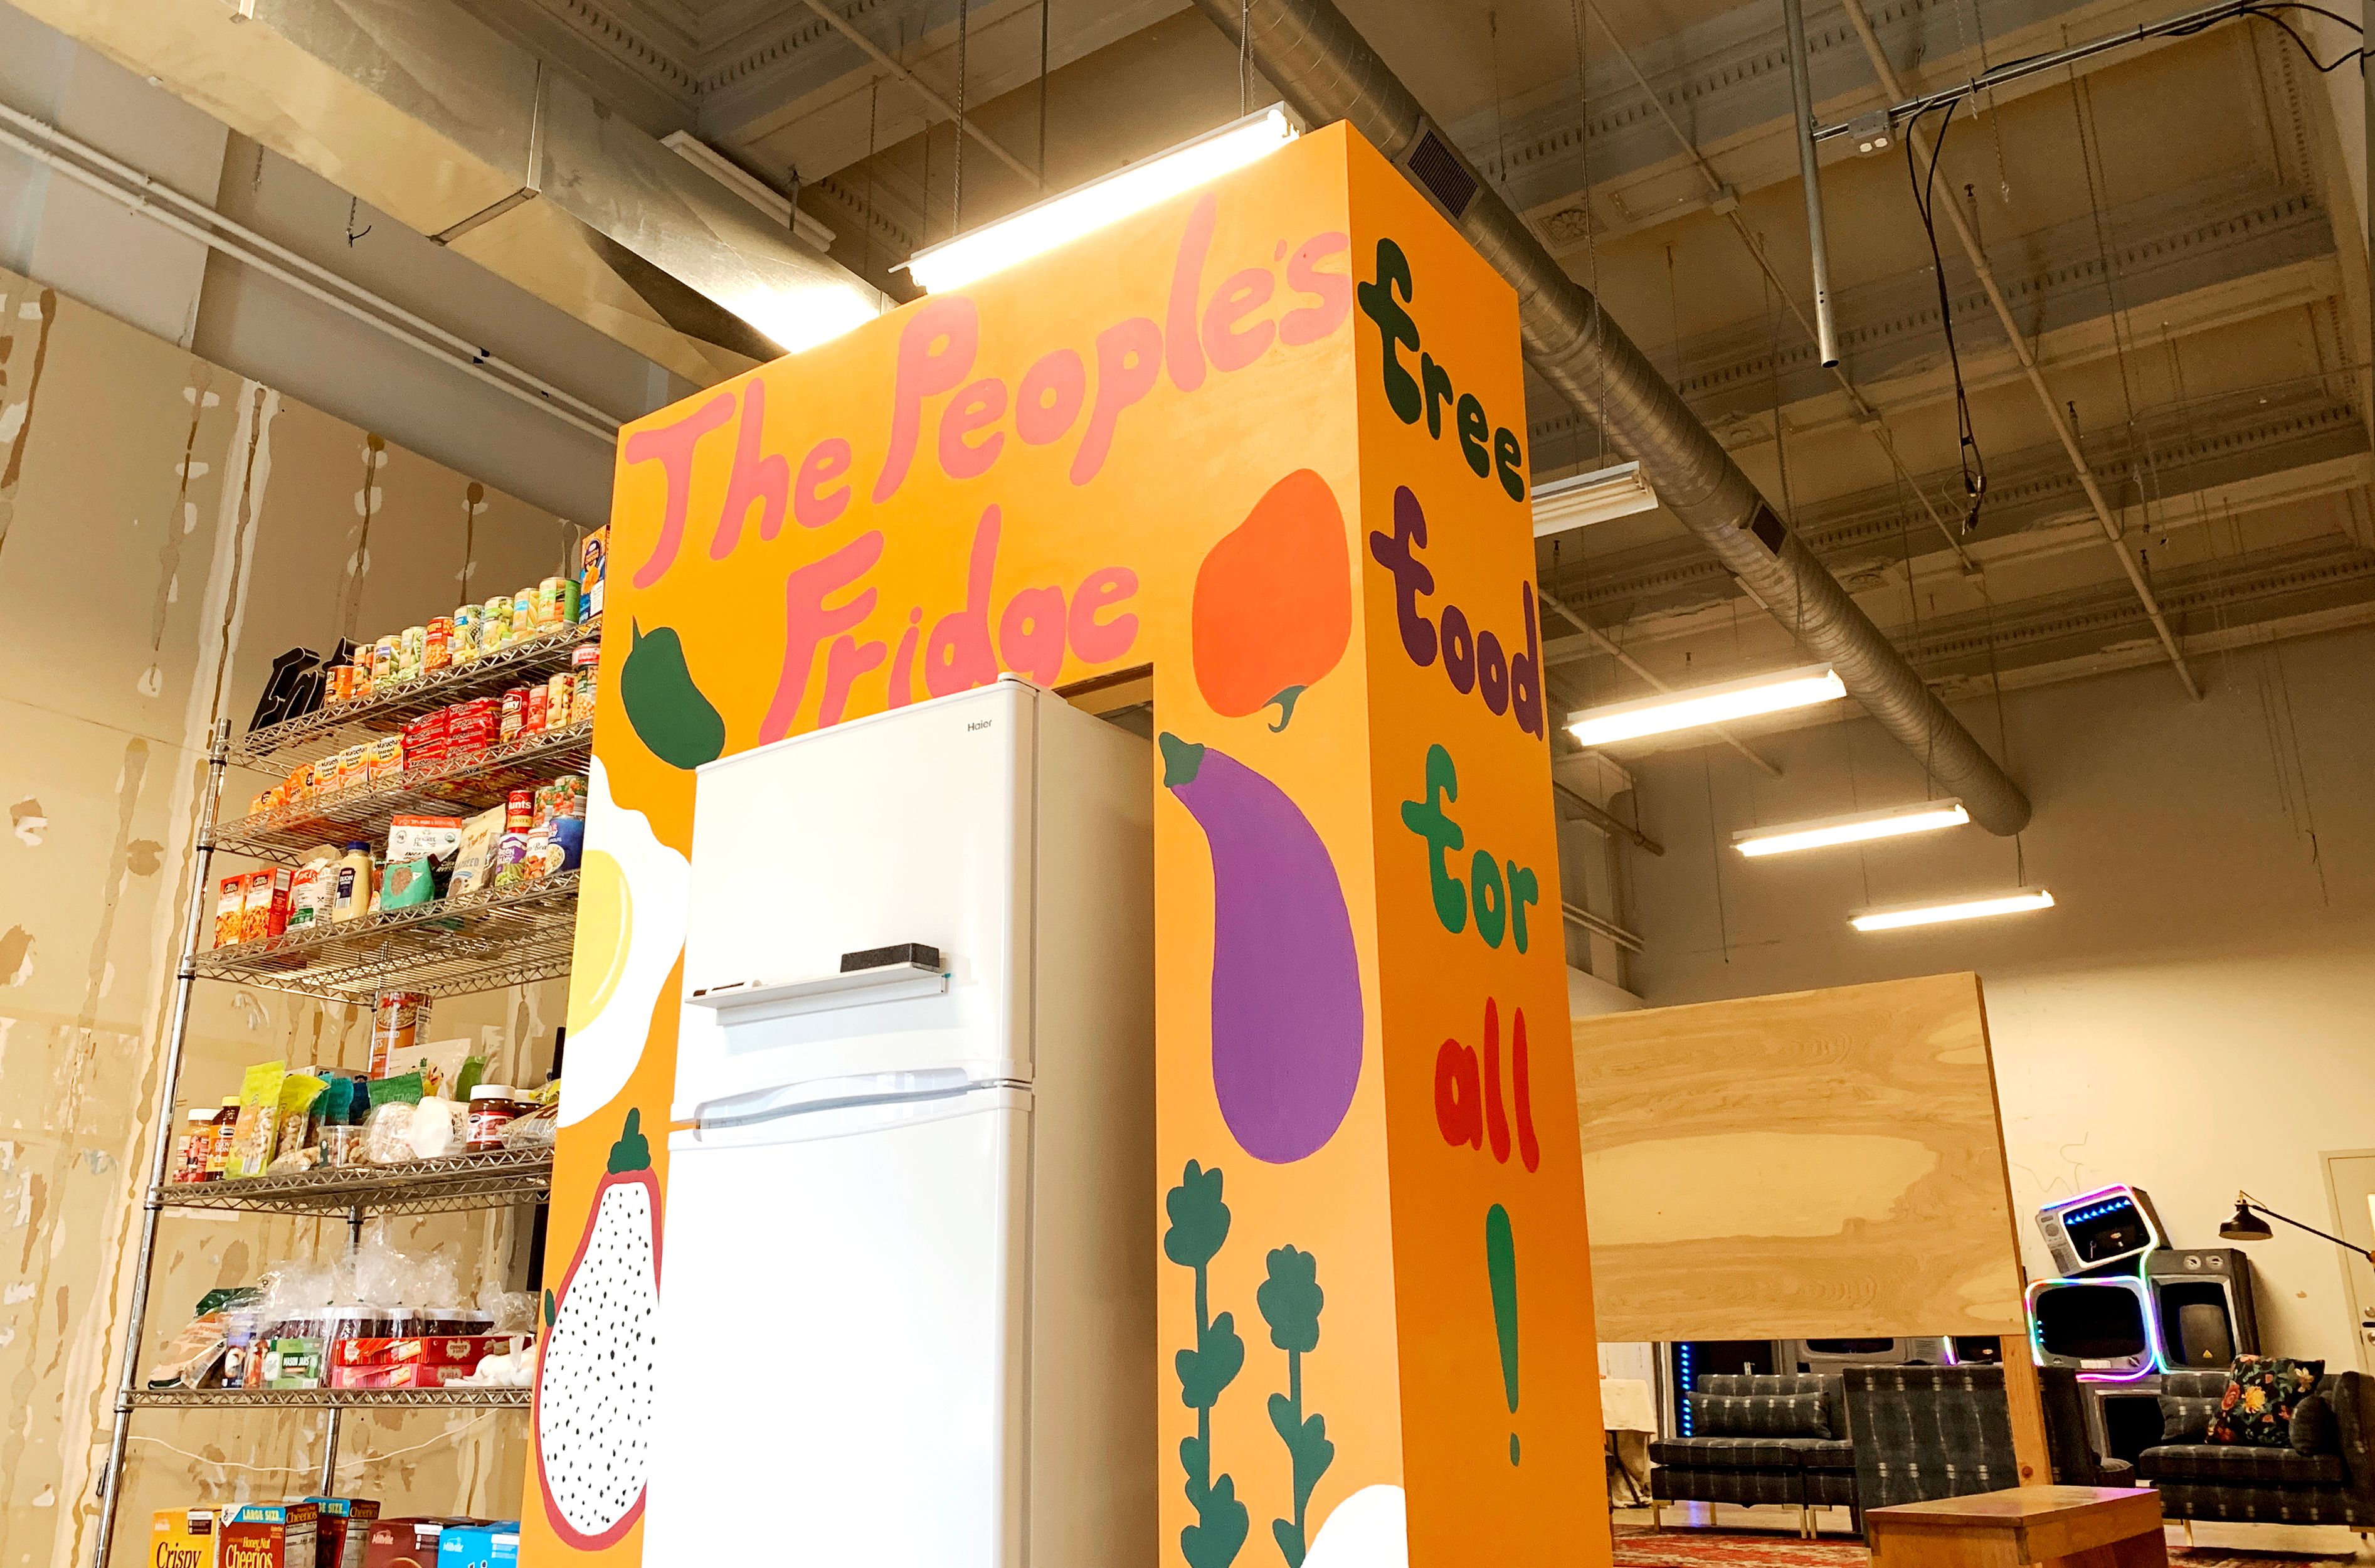 a refrigerator and a painted sign that says "The People's Fridge" 